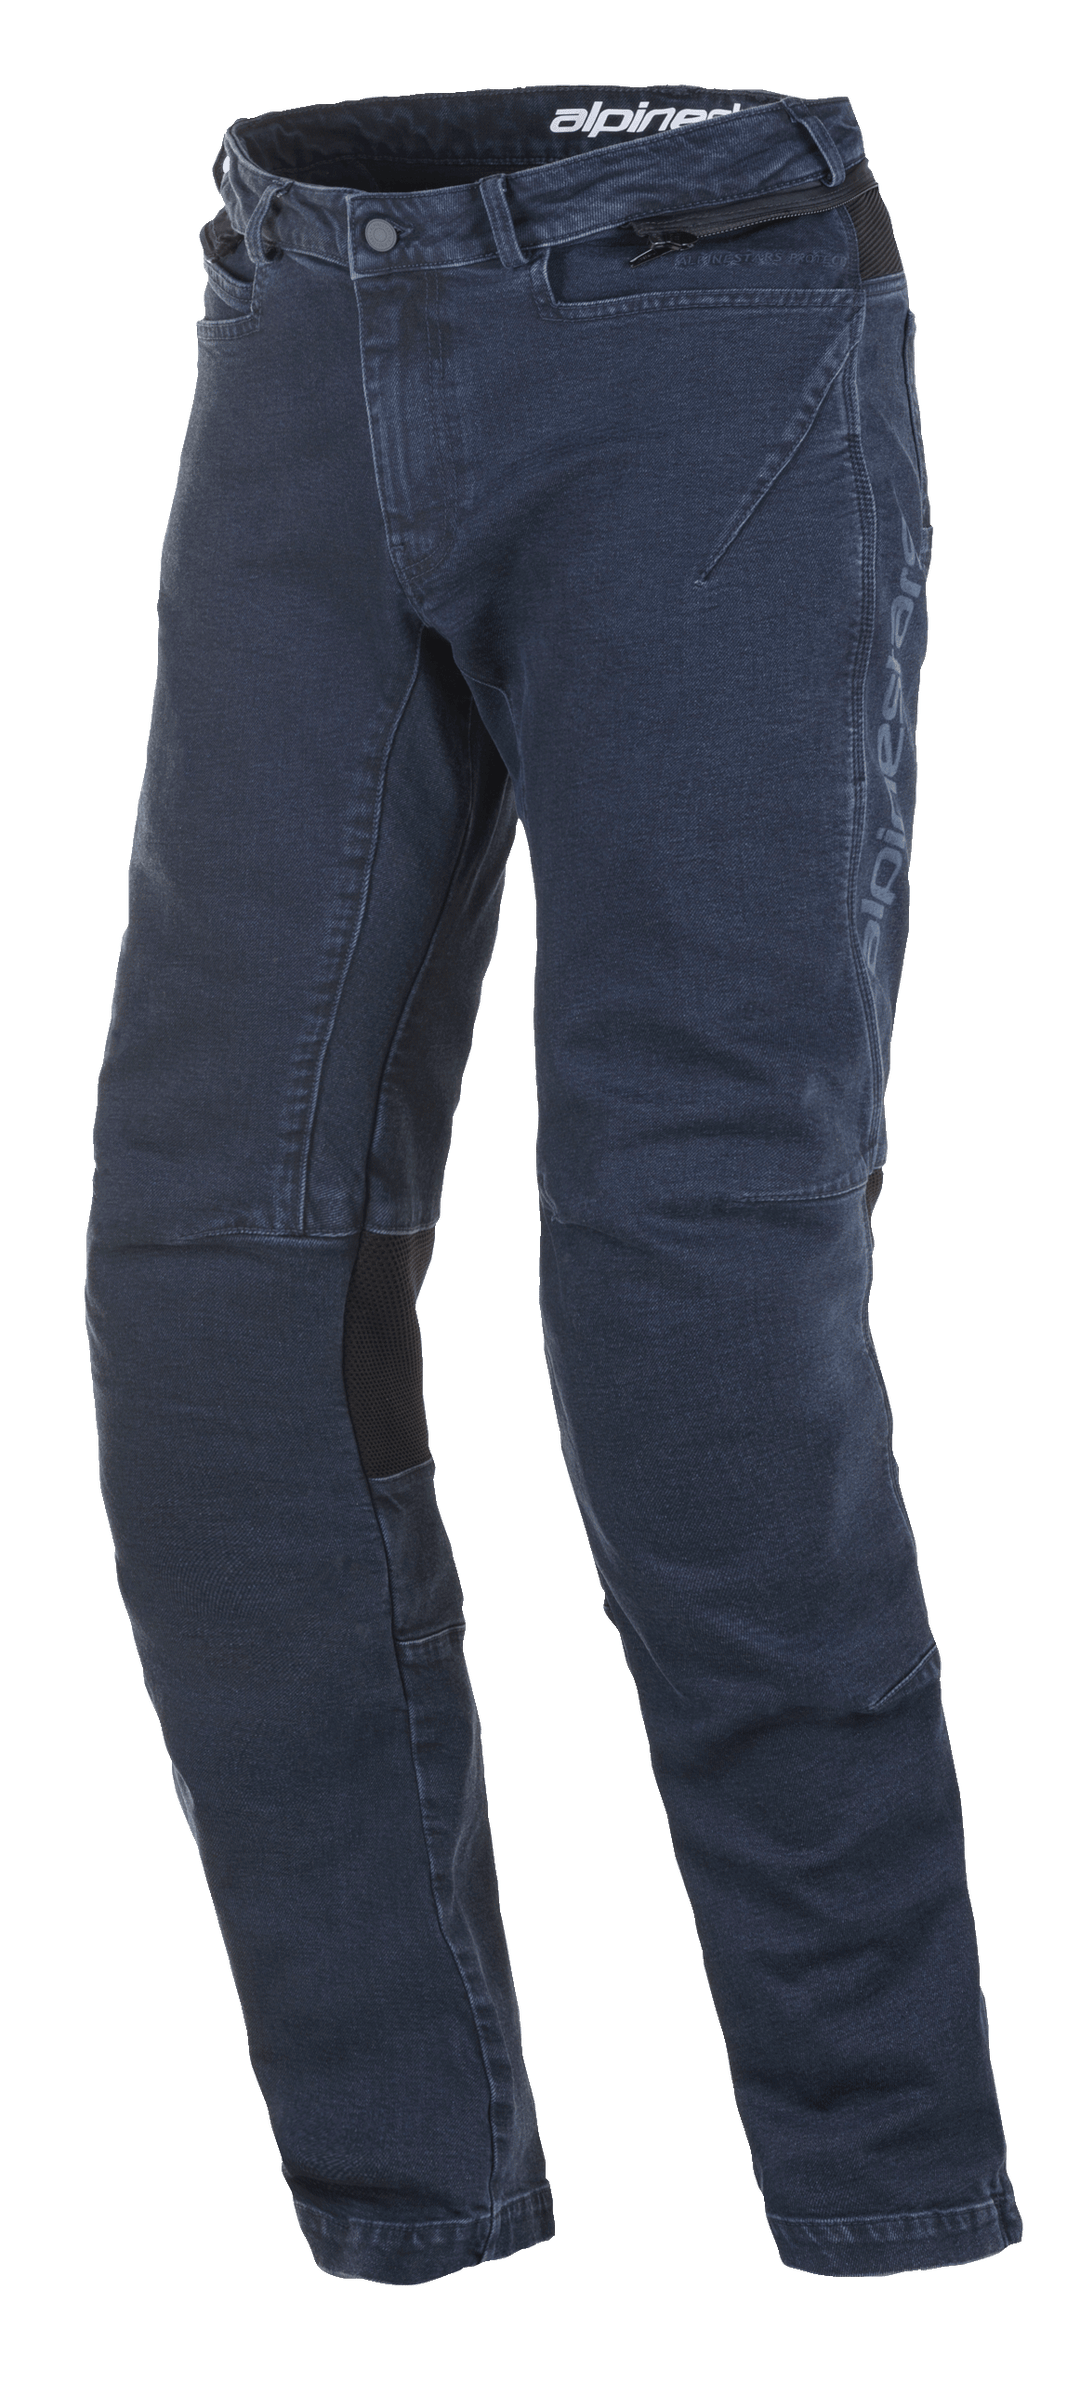 Road Riding Jeans